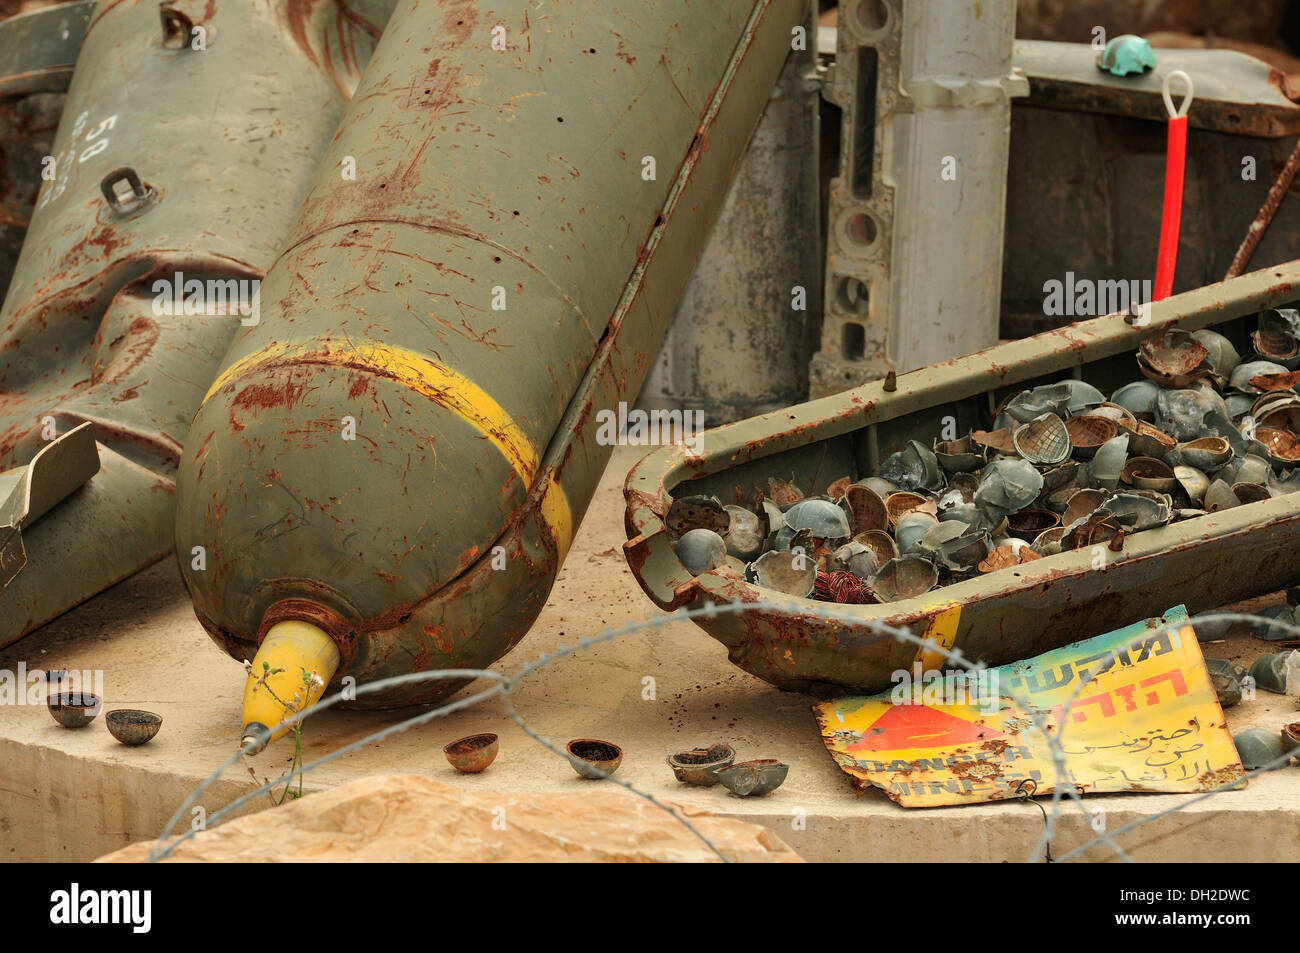 Cluster bombs, or cluster munitions, are a weapons containing Stock ...